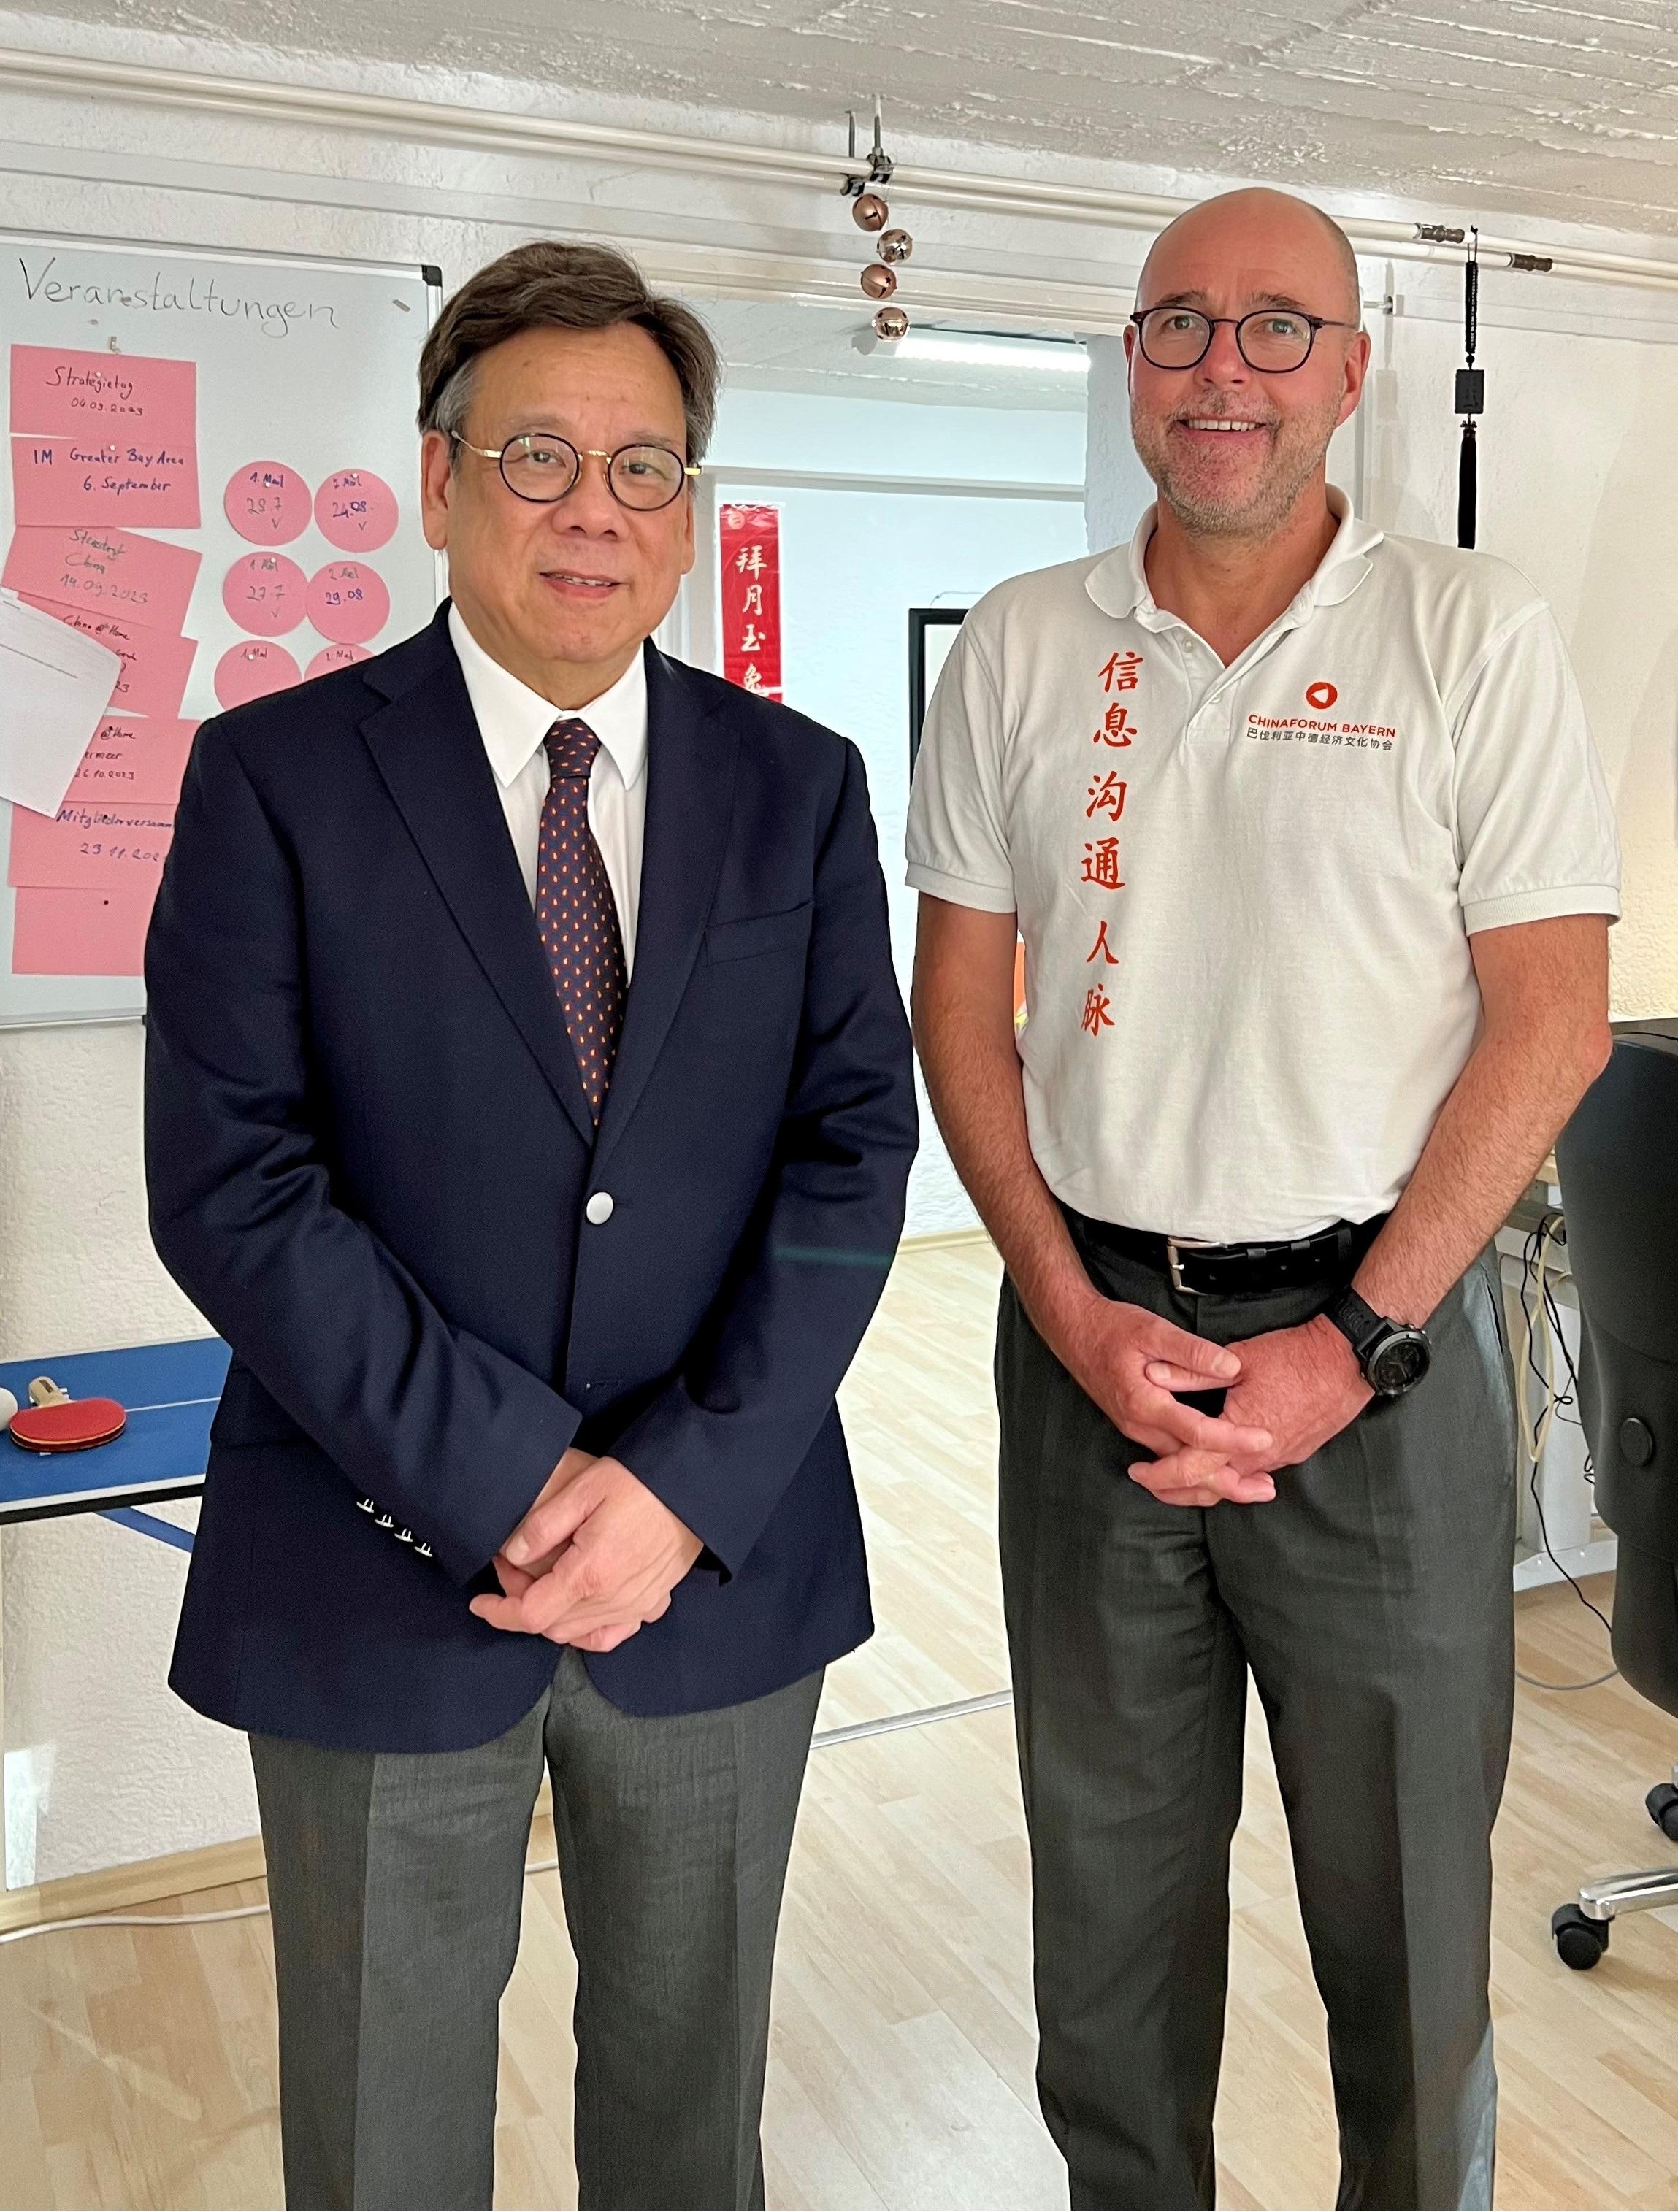 The Secretary for Commerce and Economic Development, Mr Algernon Yau (left), met with the Managing Director and Board Member of Chinaforum Bayern, Mr Stefan Geiger (right), in Munich, Germany, on September 5 (Munich time) to keep him abreast of the developments of Hong Kong and the Guangdong-Hong Kong-Macao Greater Bay Area.